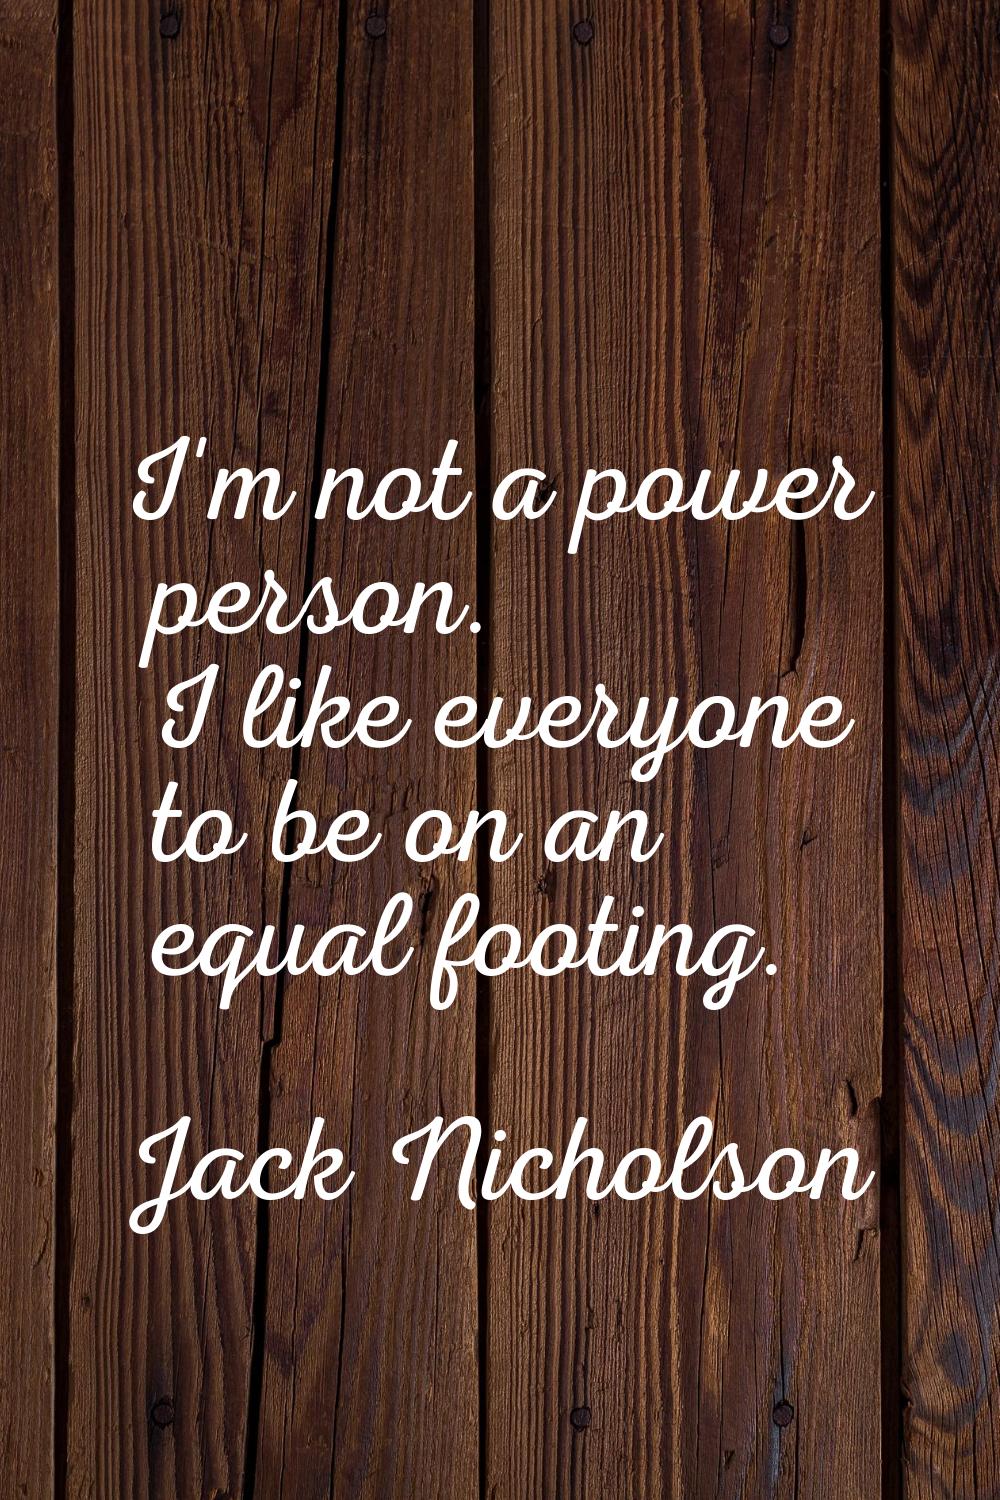 I'm not a power person. I like everyone to be on an equal footing.